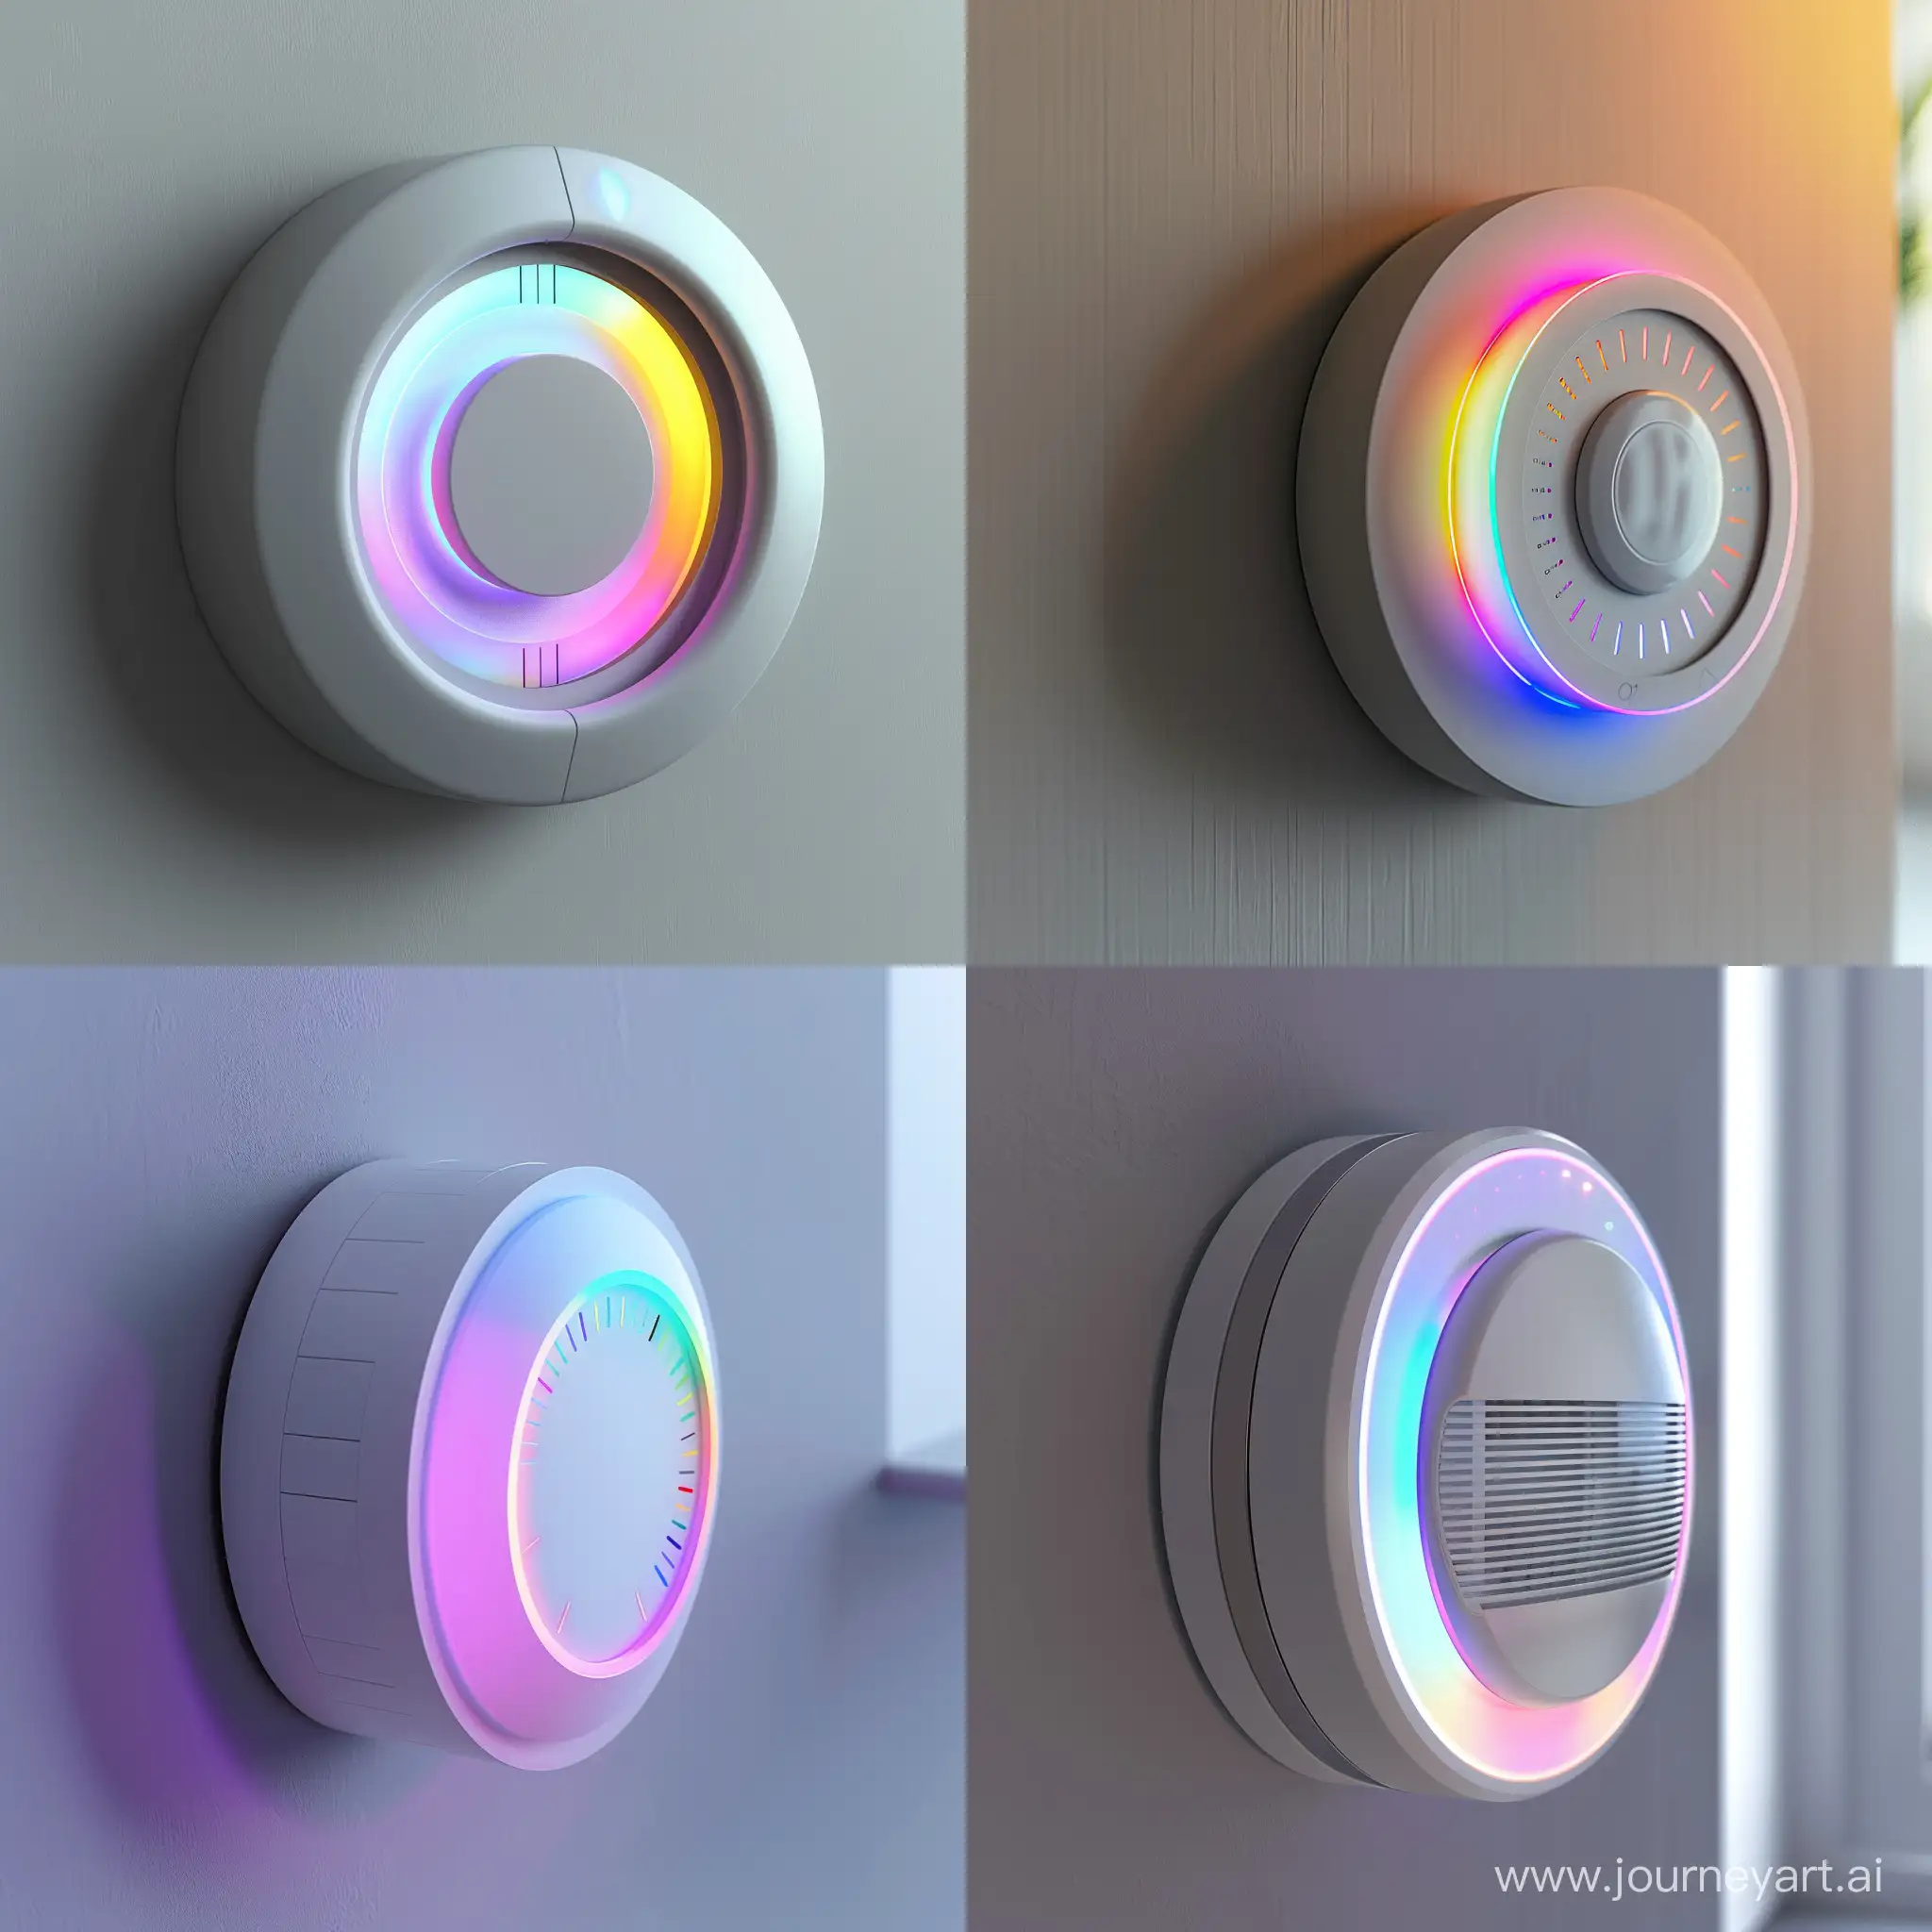 "Imagine a wall-mounted, dial-shaped light control system, made from eco-friendly polymers and metals, soft white or light gray to blend with walls. It features a tactile surface for manual adjustments and an LED ring that changes color based on lighting conditions, measuring 8 cm in diameter and 1.5 cm in depth. This device intelligently manages lighting, emphasizing energy efficiency and harmony in design, fitting unobtrusively into any interior design scheme."realistic style